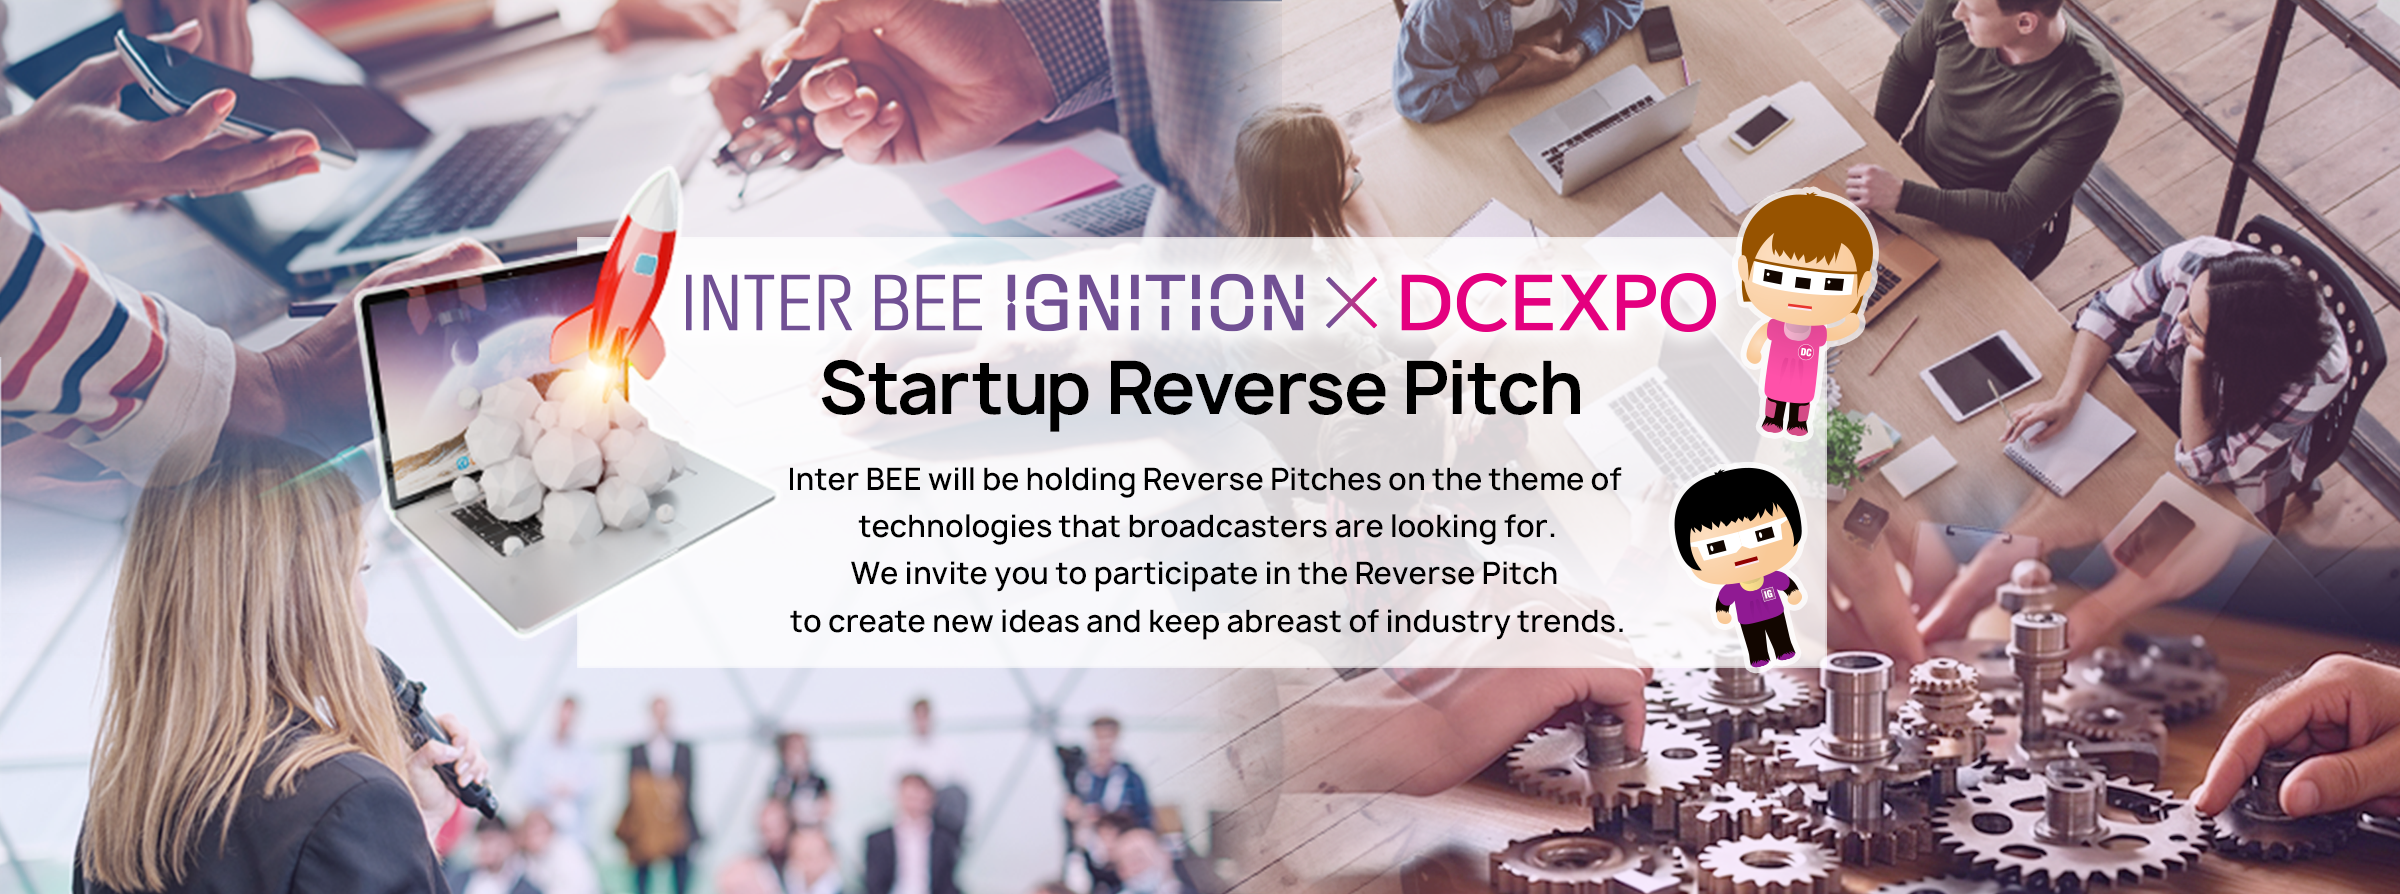 INTER BEE IGNITION × DCEXPO Startup Reverse Pitch　PC main visual